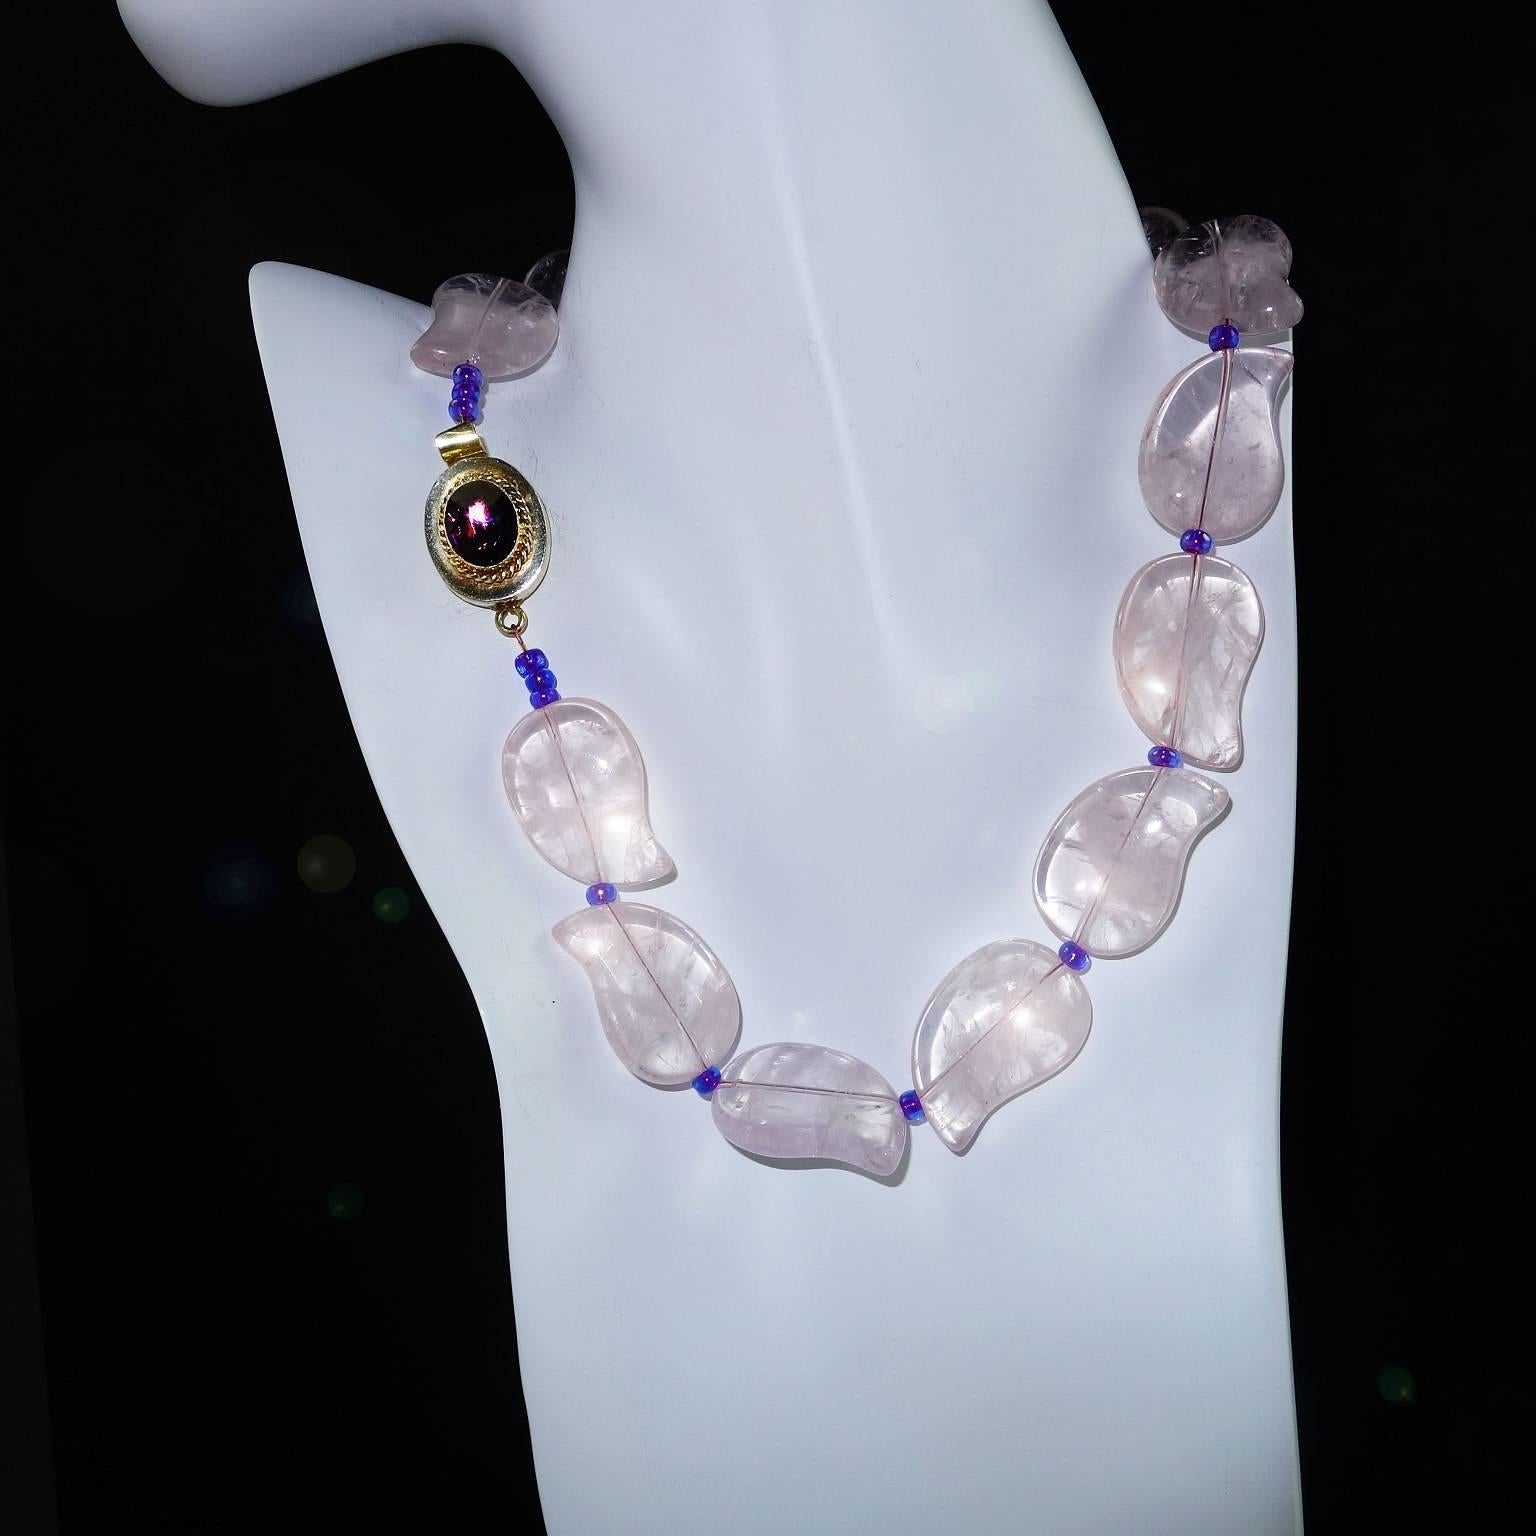 Rose Quartz Leaf Motif Choker length Necklace (17.5inches).  Each delicate leaf is glowing Rose Quartz with just enough inclusions to reflect light to sparkle and dance in the light.  In addition, there are purple Czech crystal beads to accent the